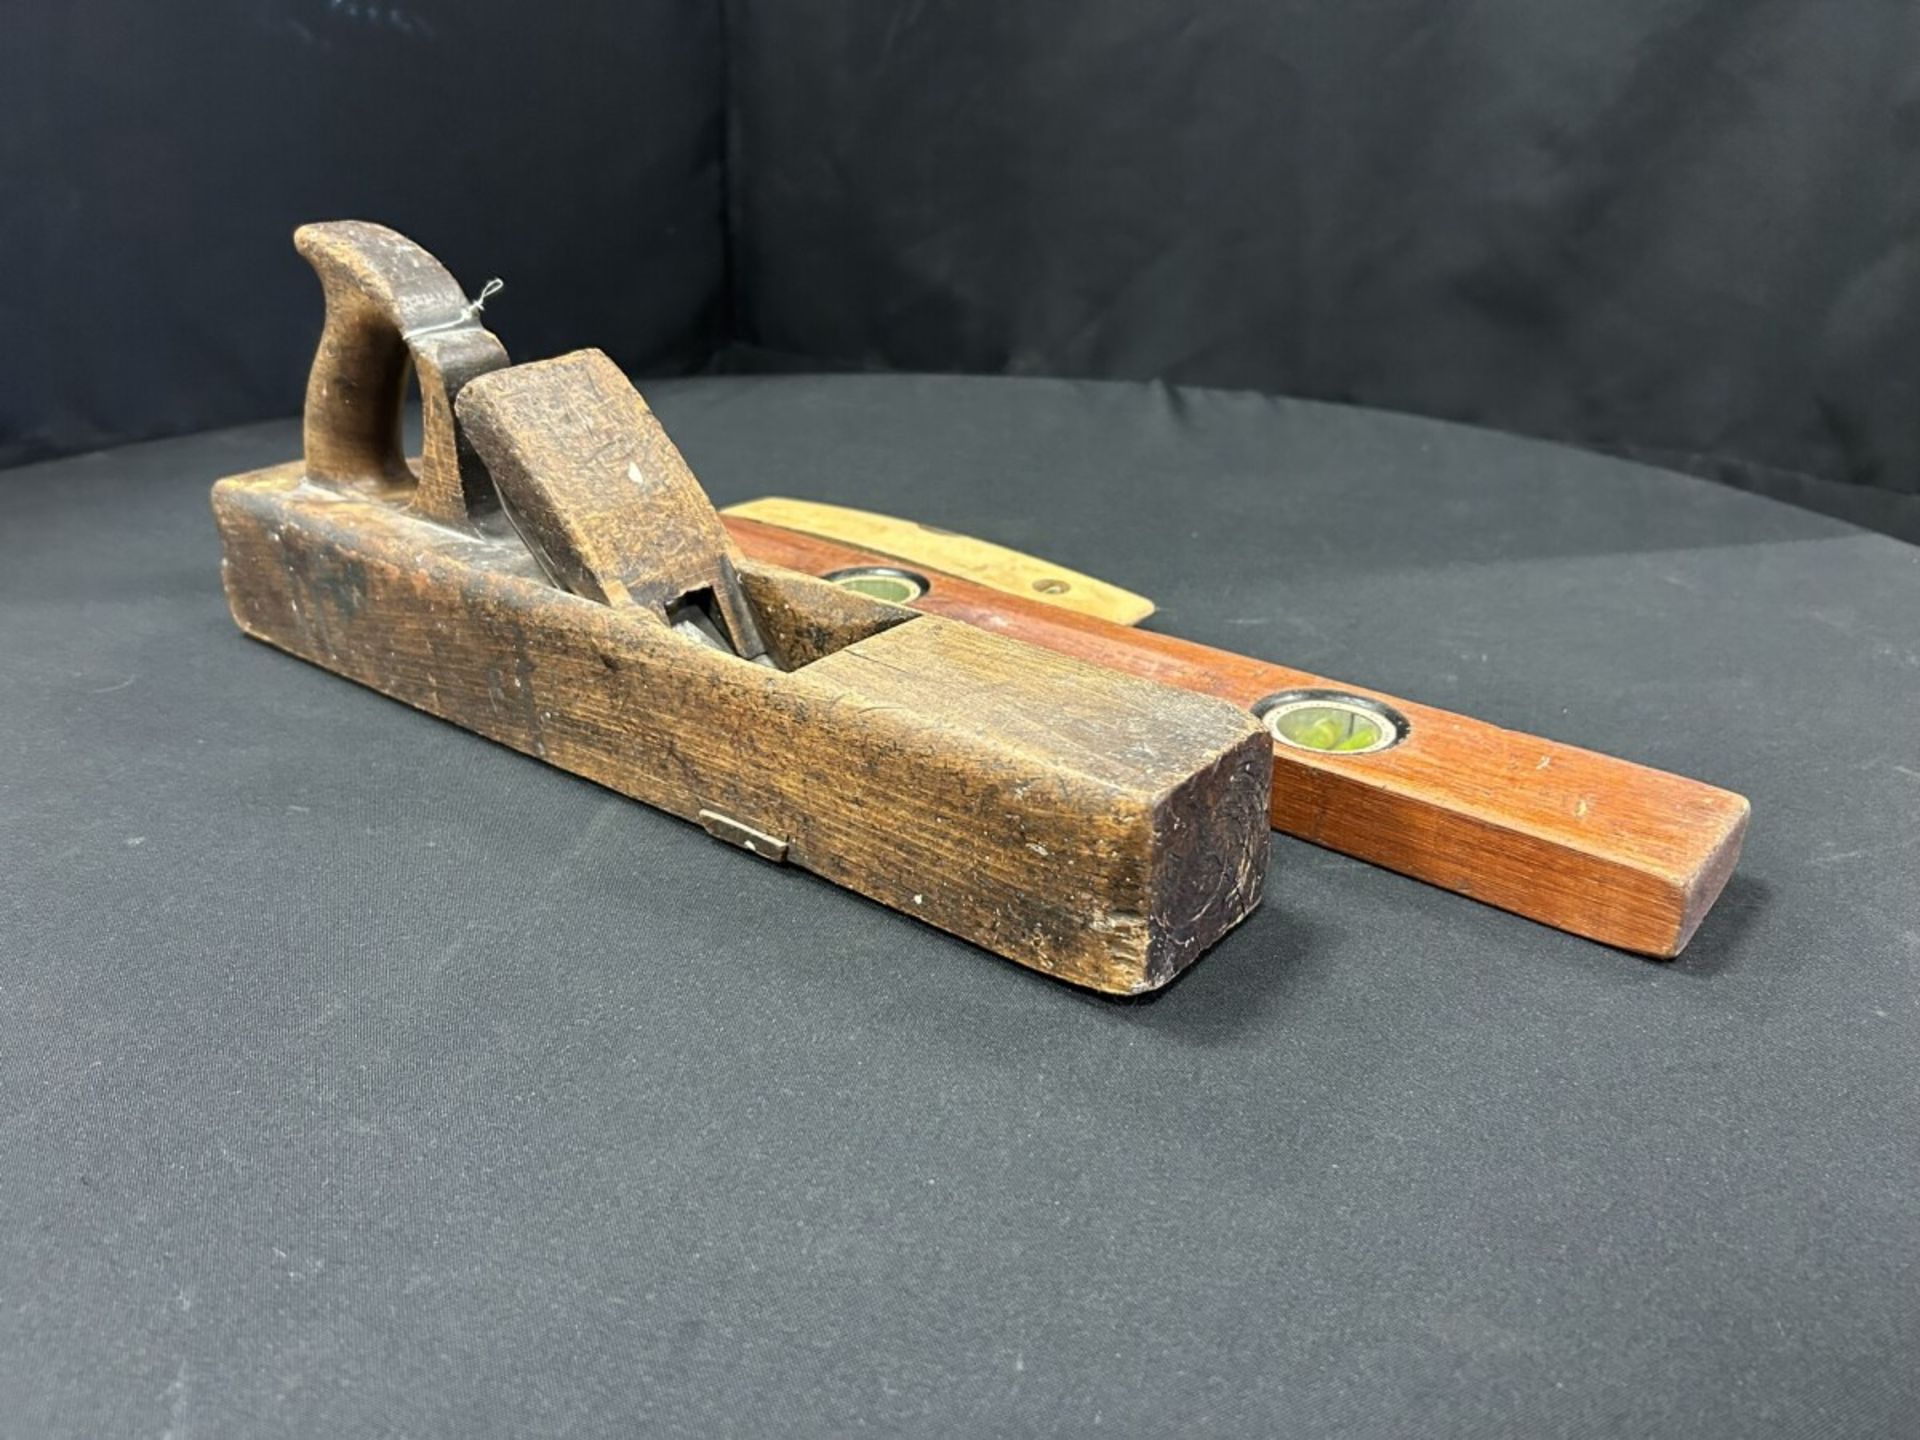 ANTIQUE WOODEN BLOCK PLANE AND WOODEN CARPENTERS LEVELS - Image 3 of 5